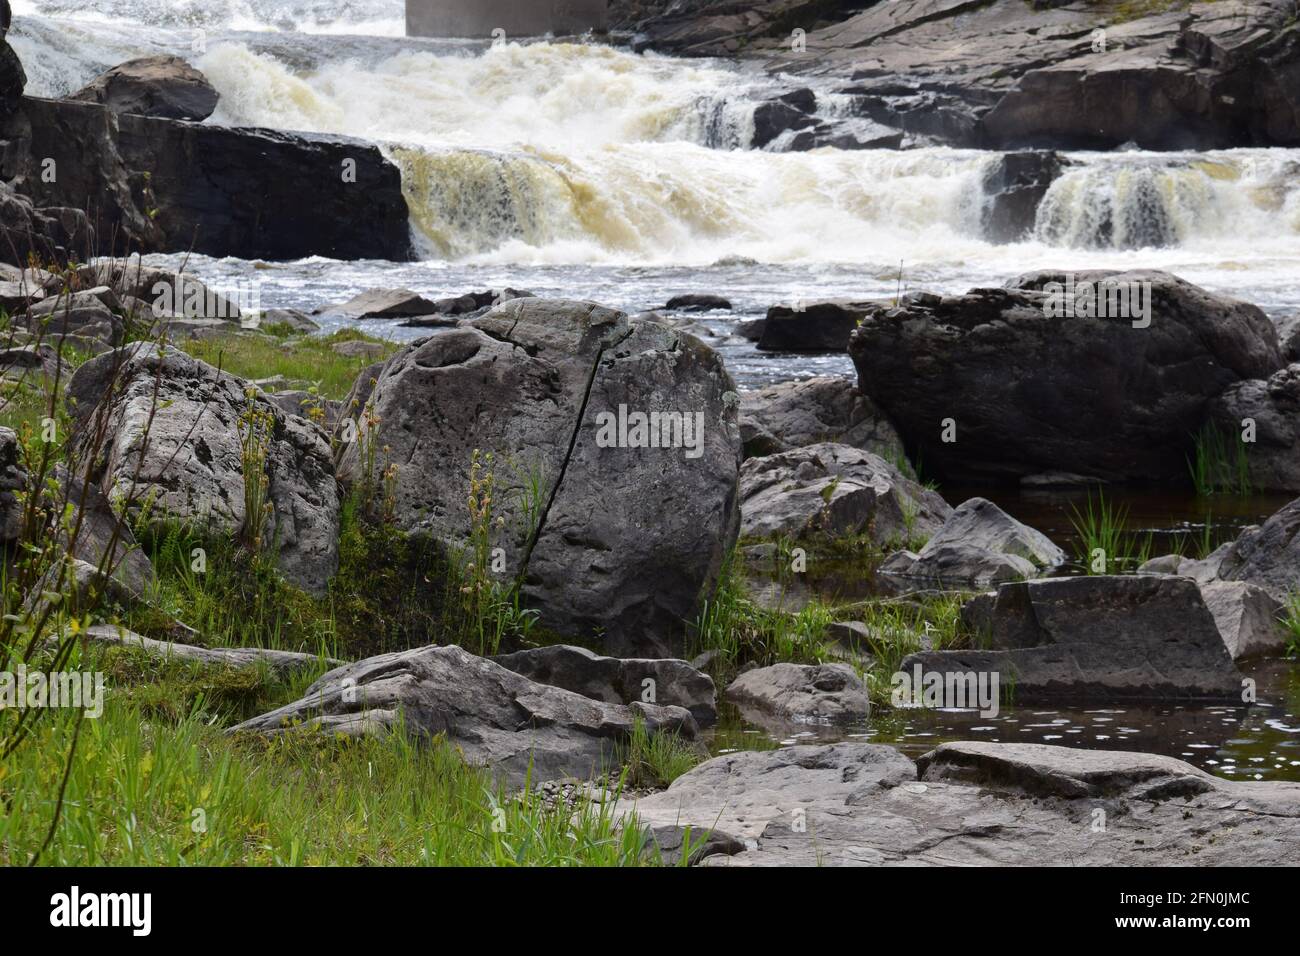 Scenic Maddington waterfalls in southern Quebec. This stream ends in the St-Lawrence waterway. However modest it’s cuteness is worth a caption. Stock Photo